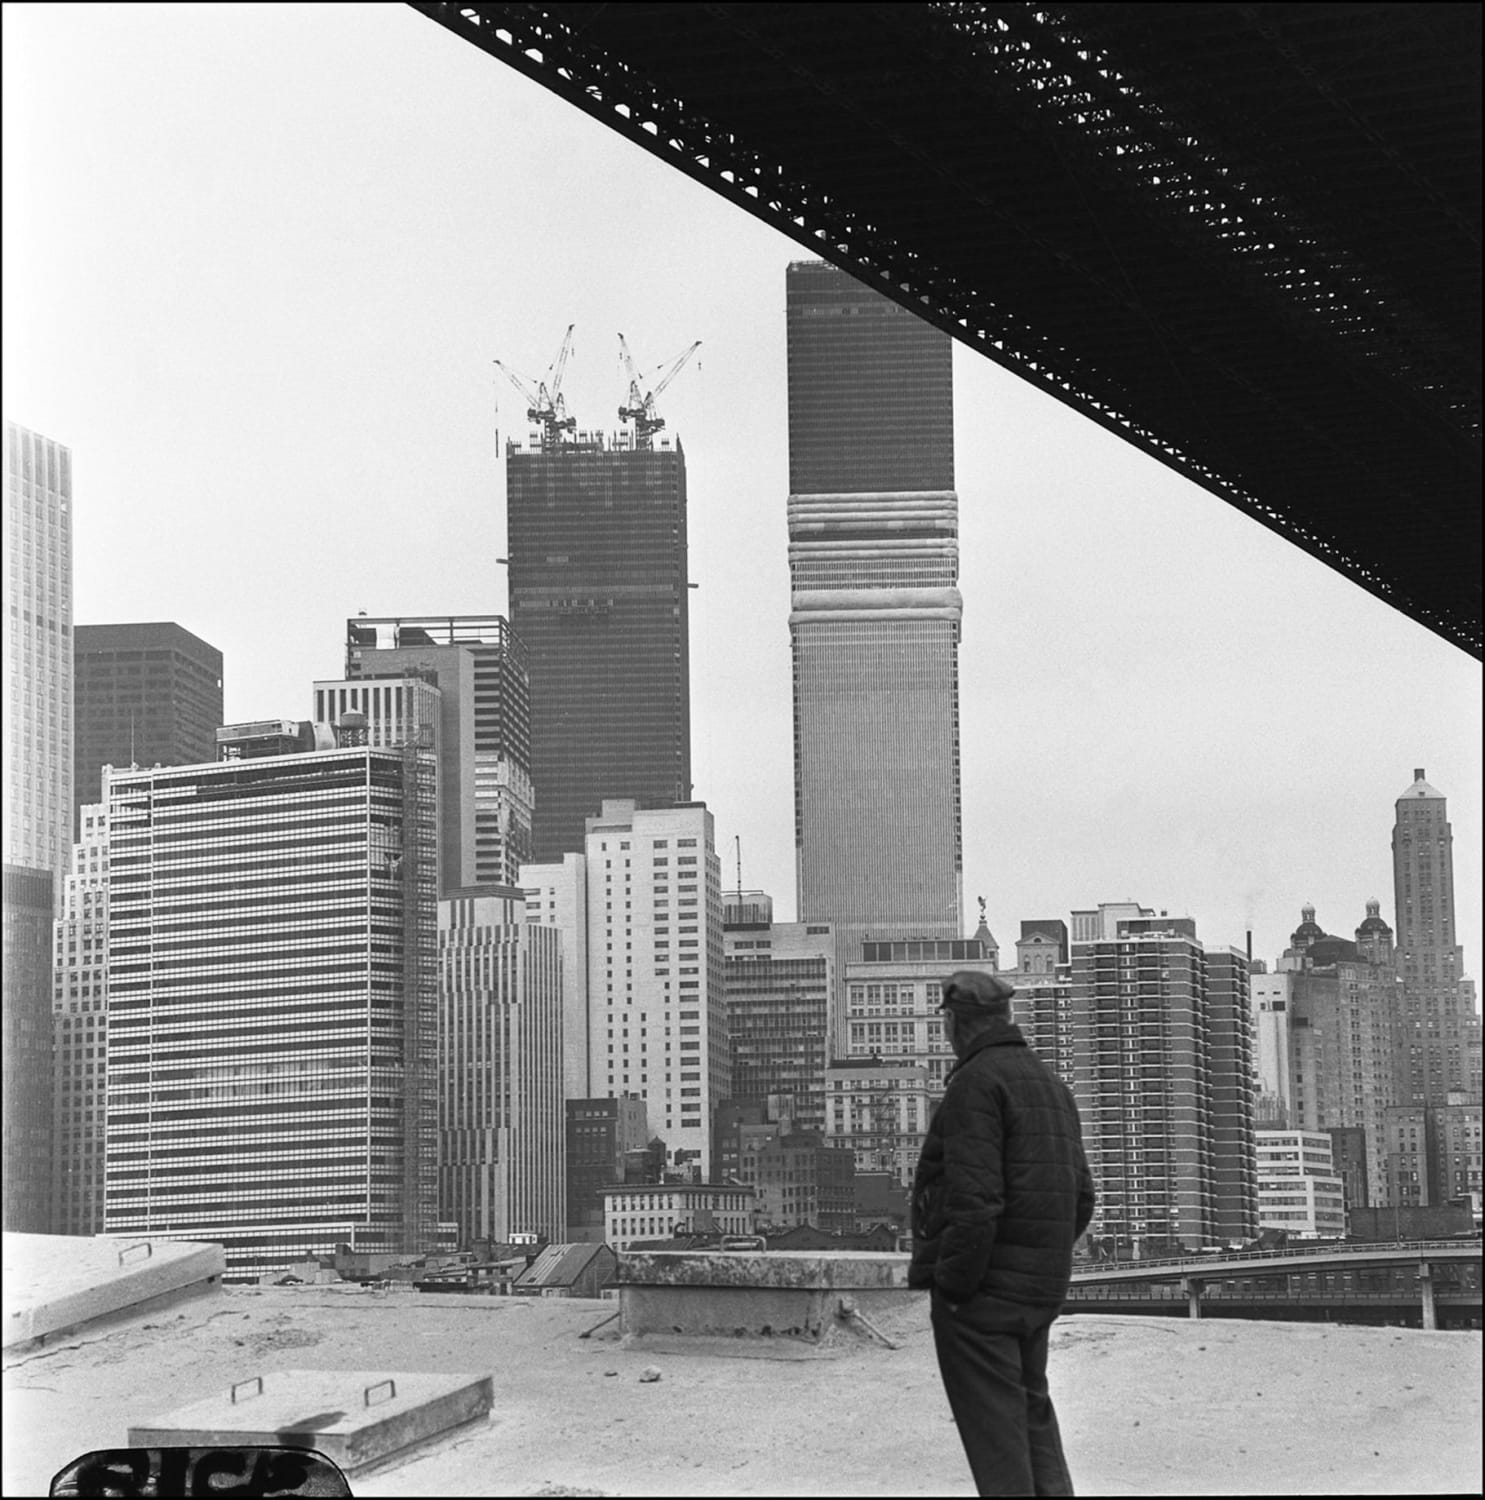 World Trade Center Under Construction, seen from below the Brooklyn Bridge, 1971. Photo by Paul Rice